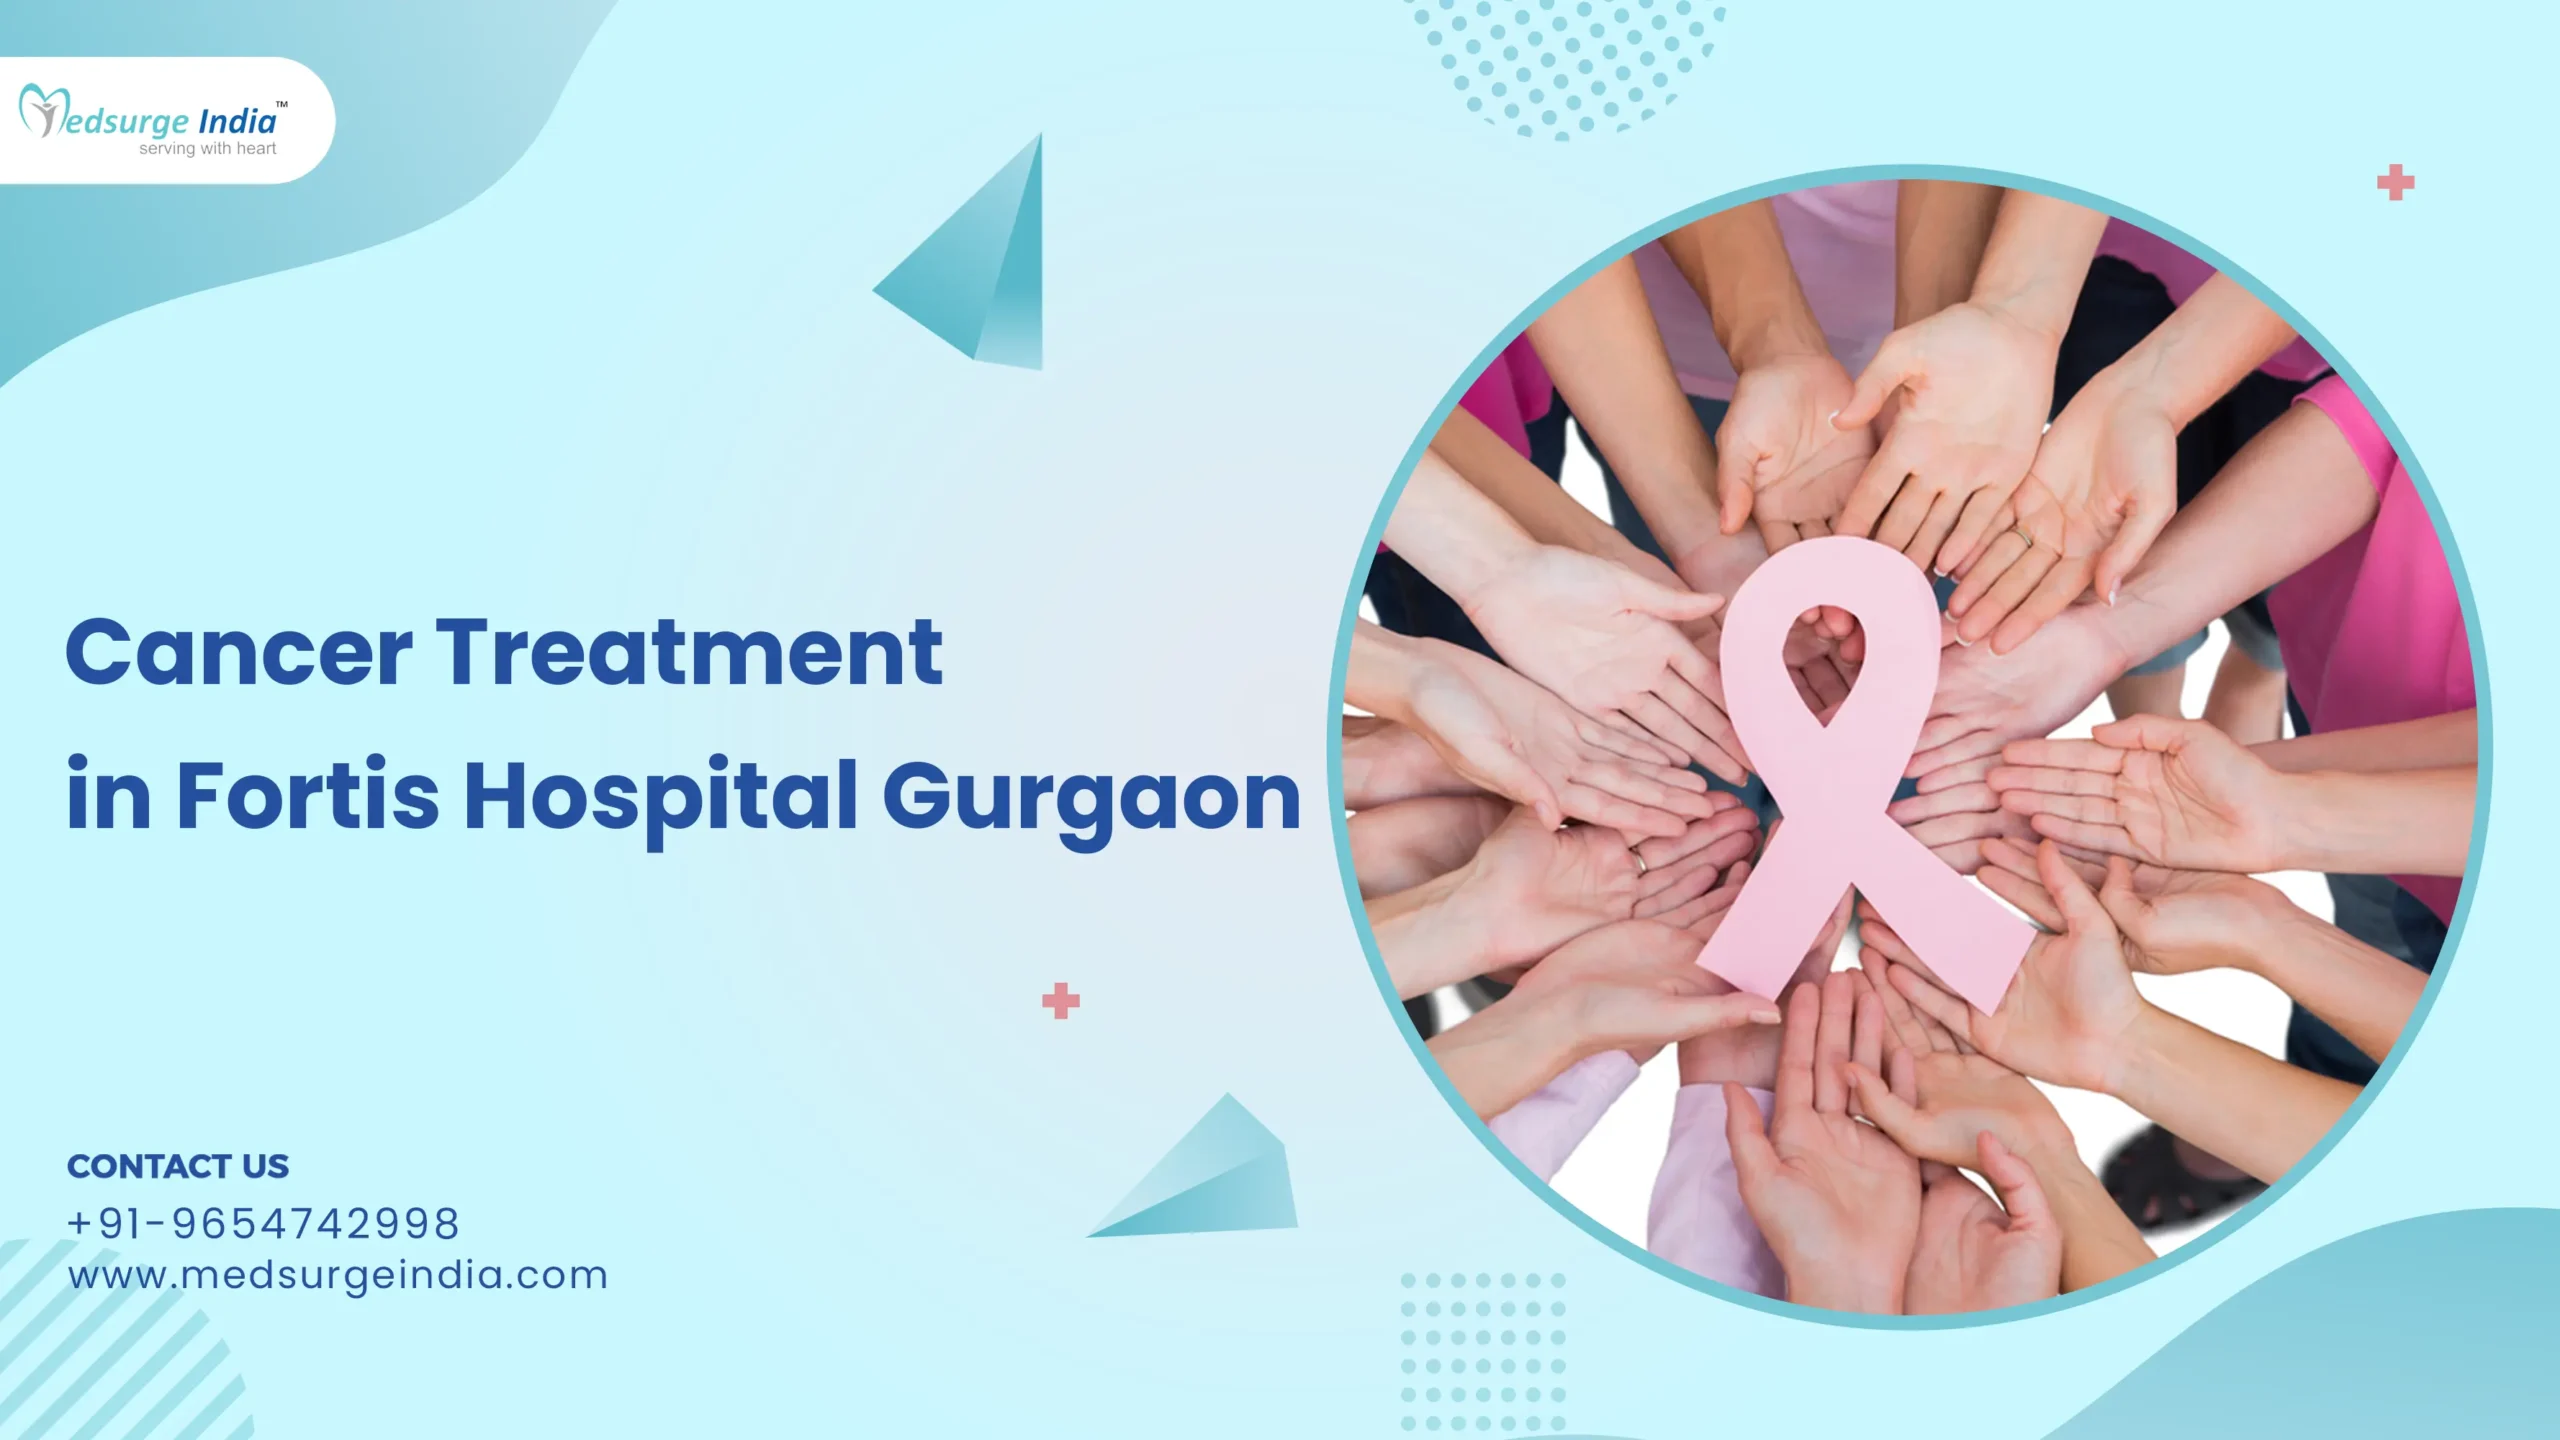 Cancer Treatment in Fortis Hospital Gurgaon